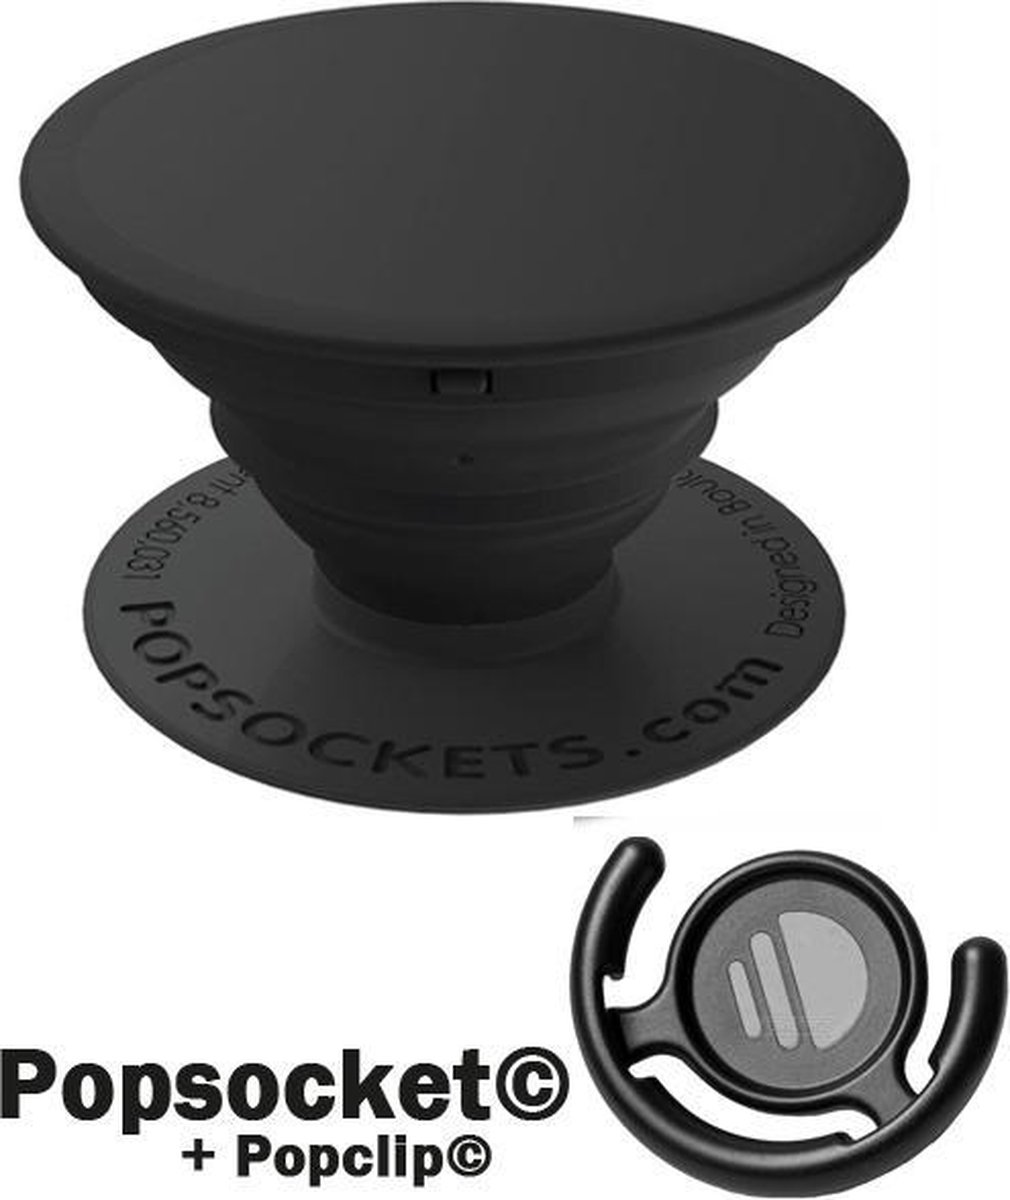 popsocket popclip for one dollore